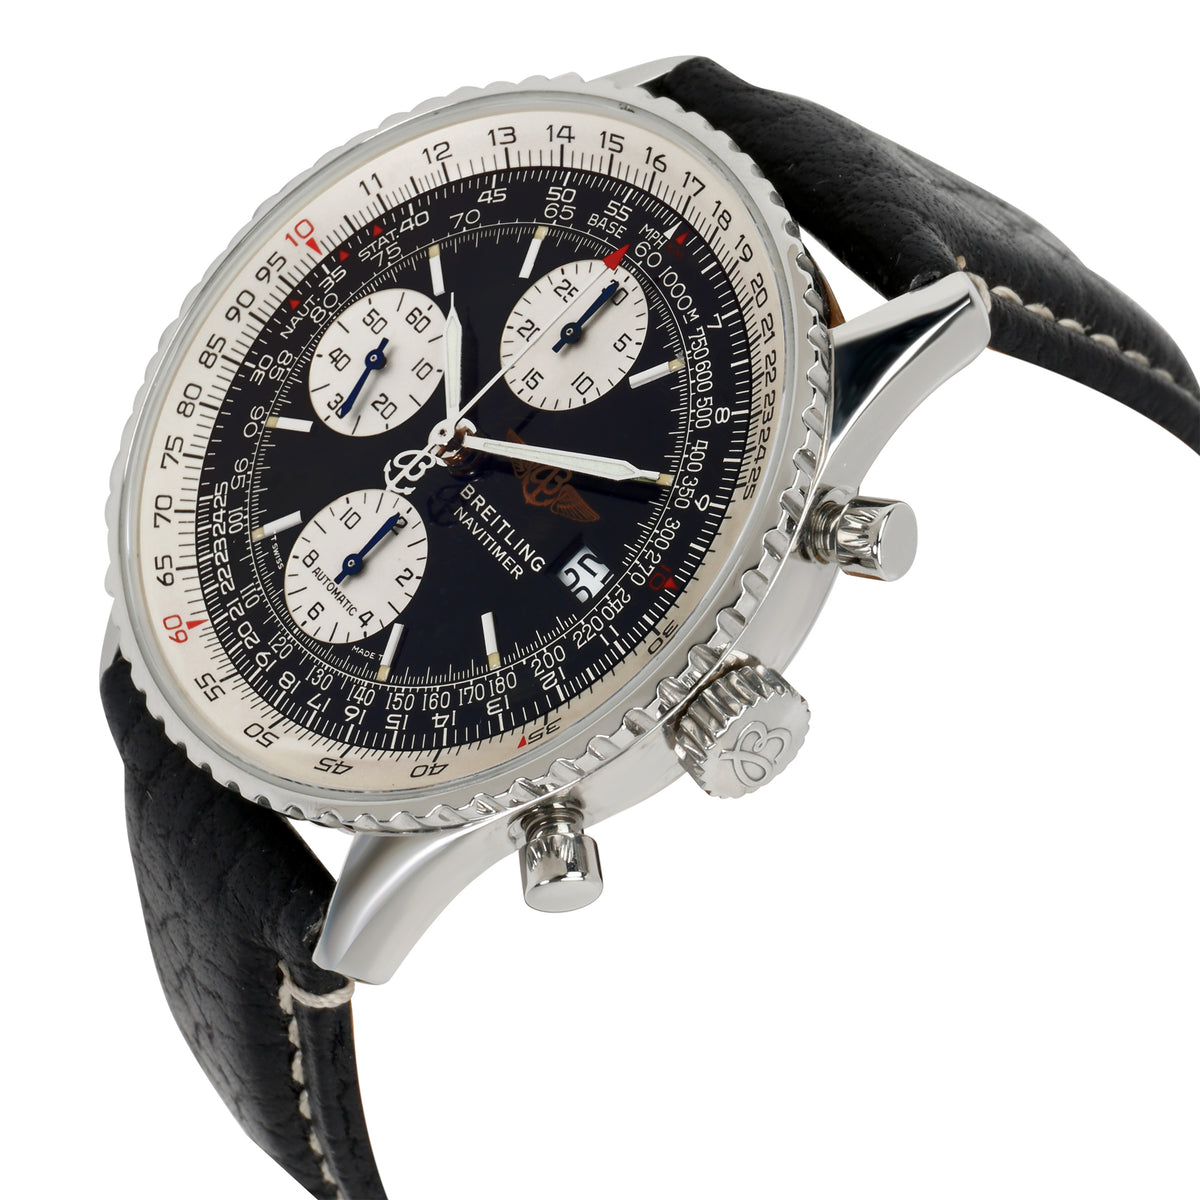 Breitling Old Navitimer II A13022 Men's Watch in  Stainless Steel